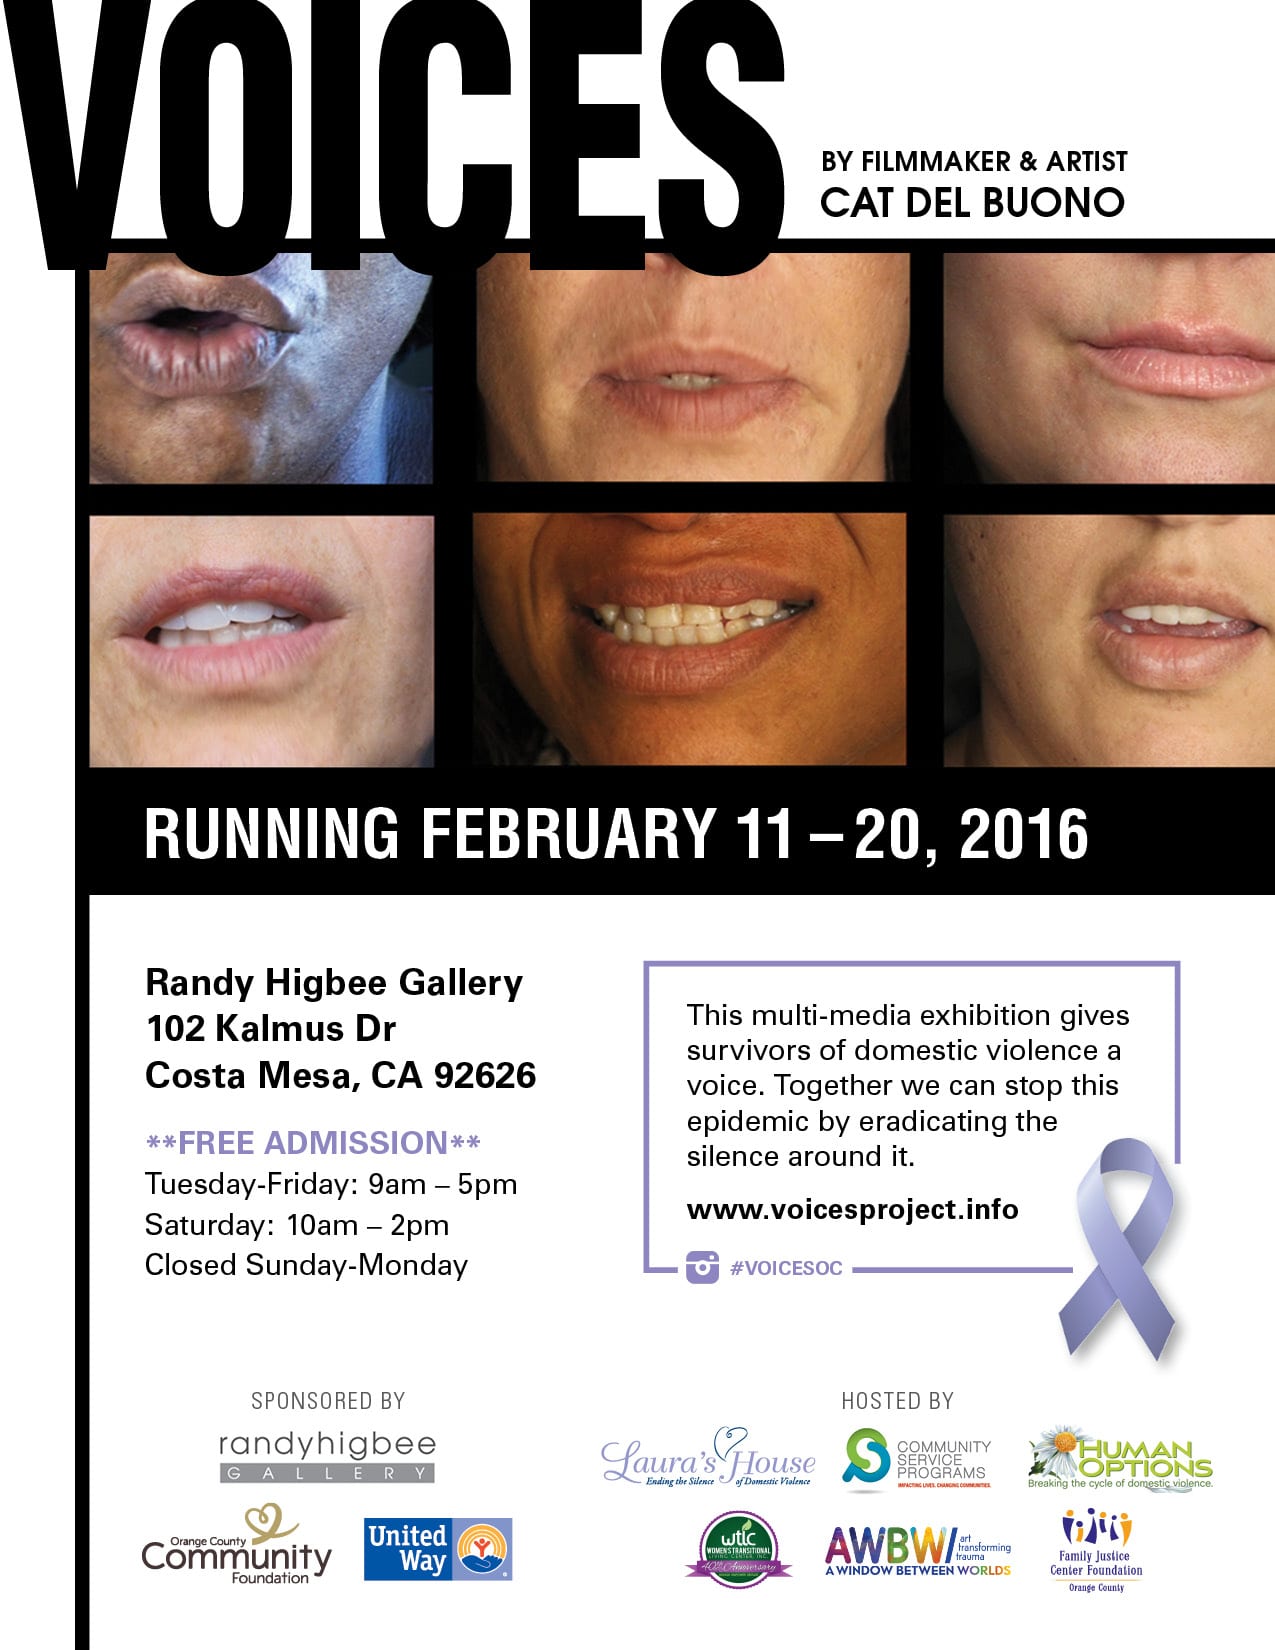 Voices flyer at Randy Higbee Gallery